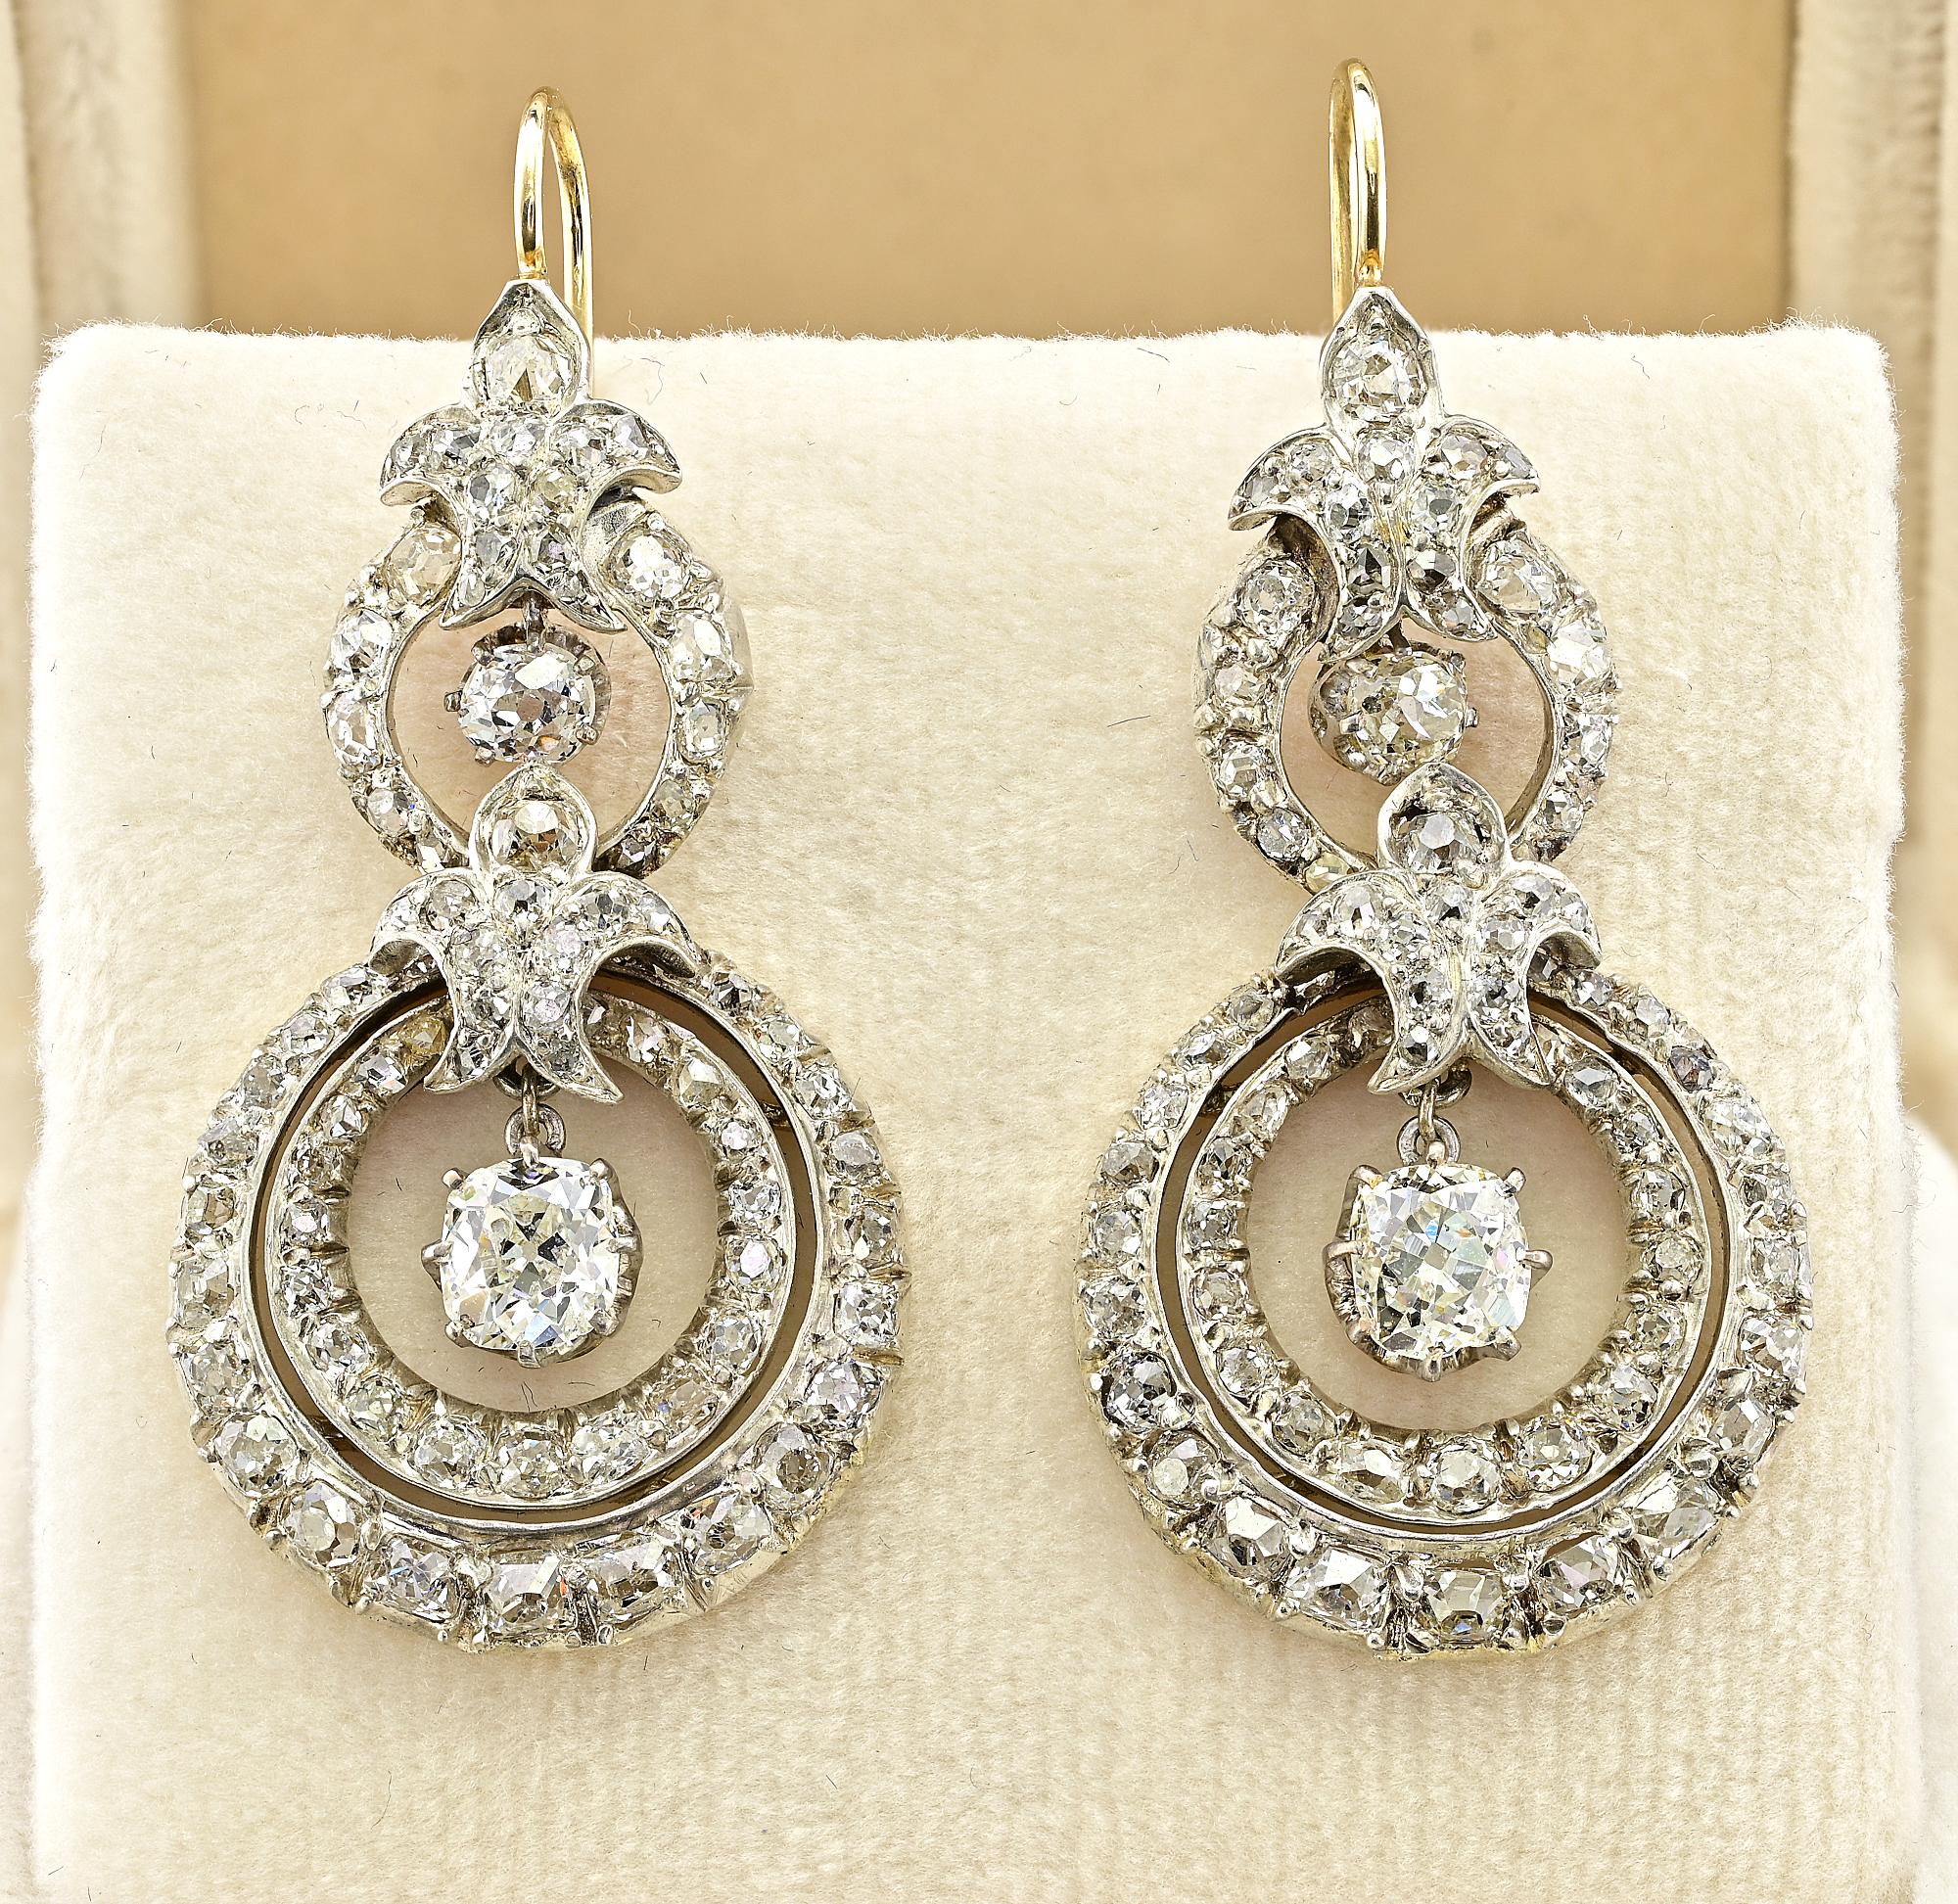 This magnificent pair of Diamond drop earrings are Victorian era, 1870 circa
Hand crafted during the time of solid 18 KT gold silver topped
They articulate into a distinctive circular shape displaying fine workmanship loaded with opulence of bright